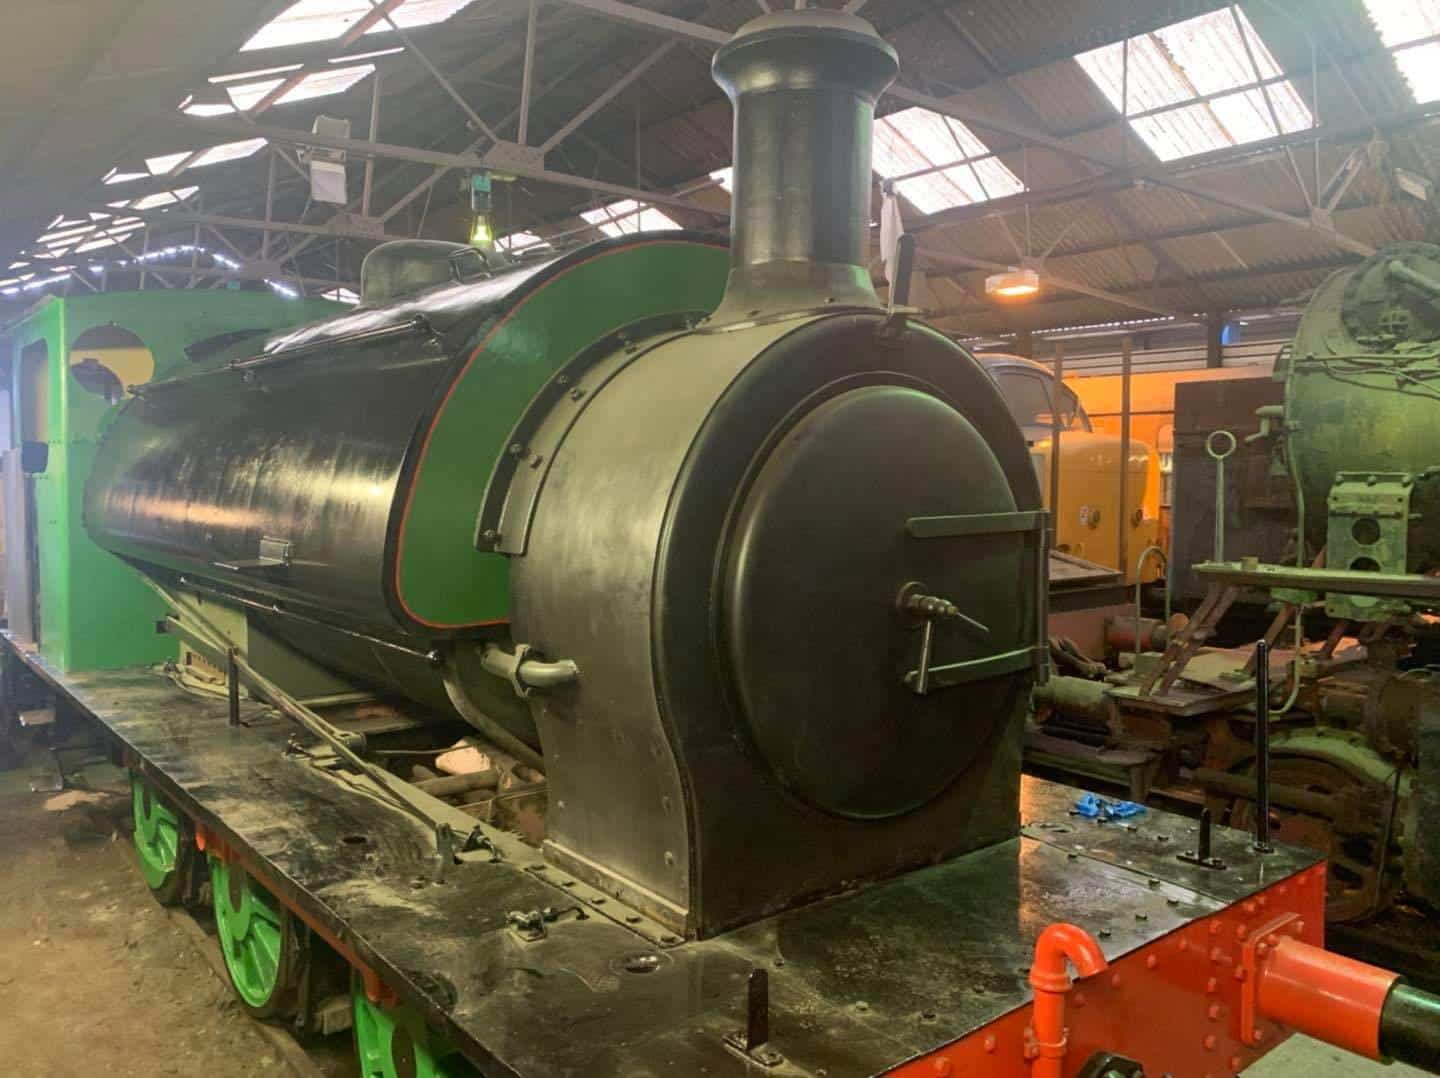 Jacks Green Front View // Credit The Small Loco Group